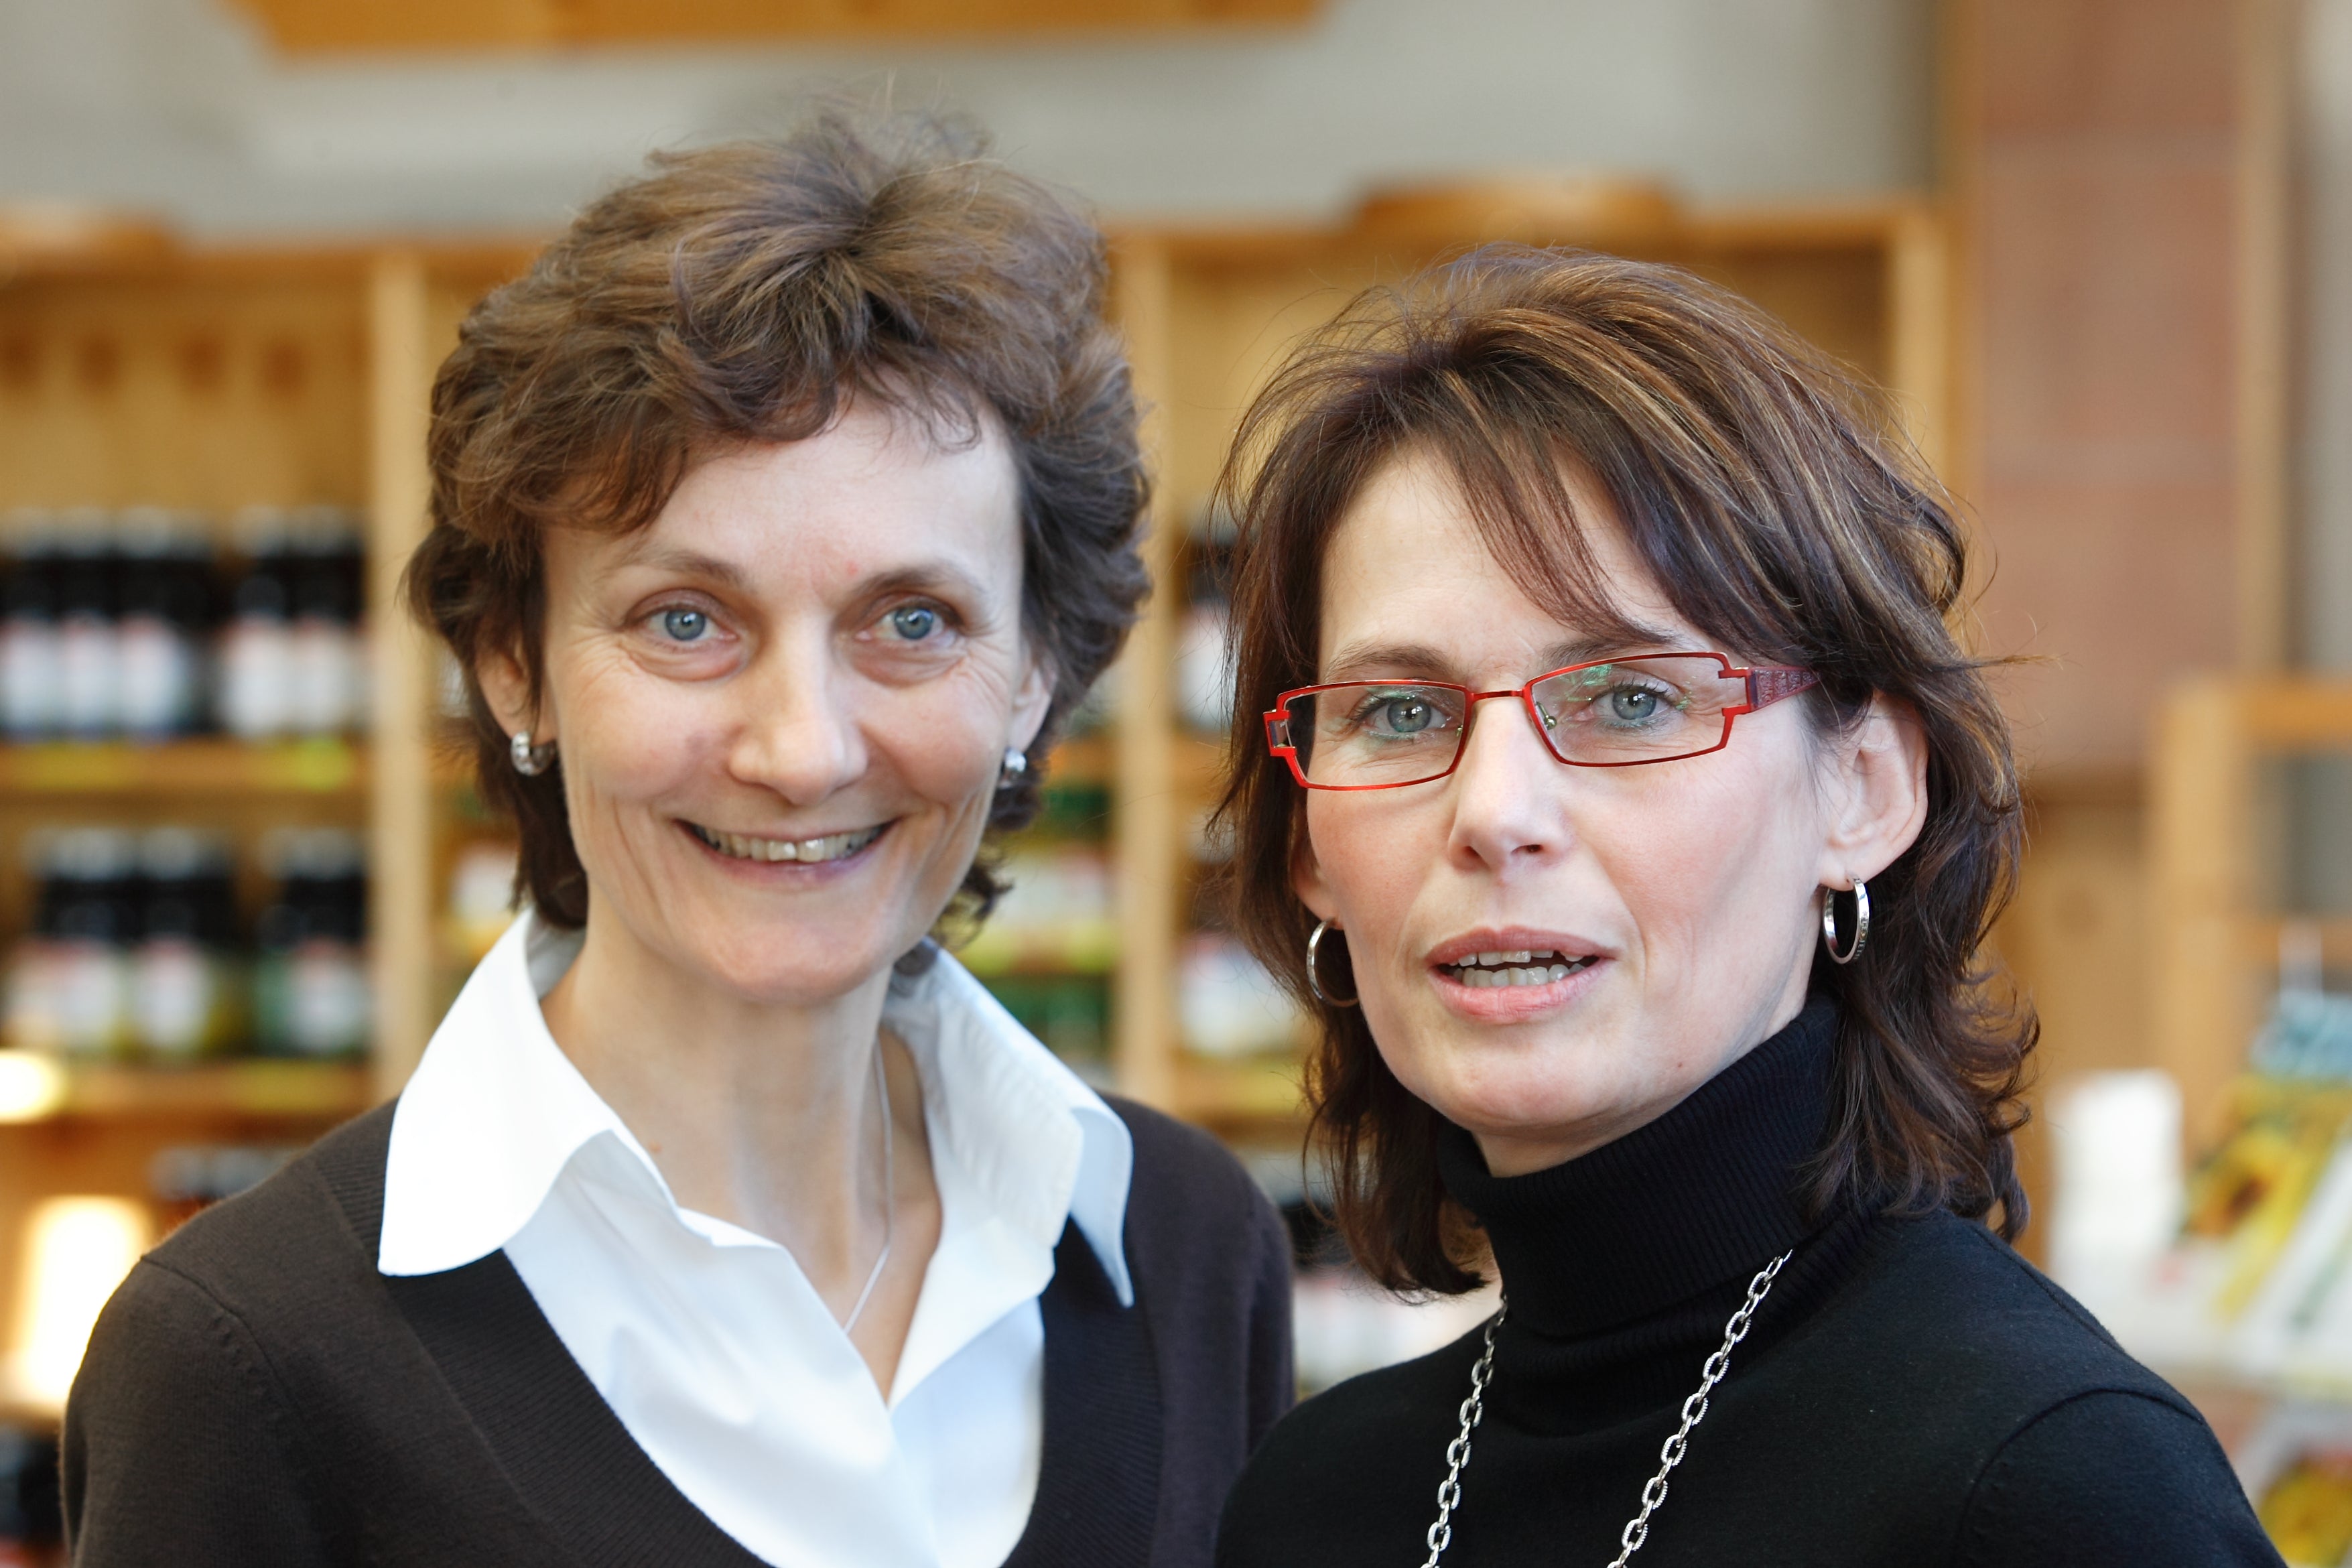 Karin Lamparter and Heike Spohn stand next to each other, smiling.